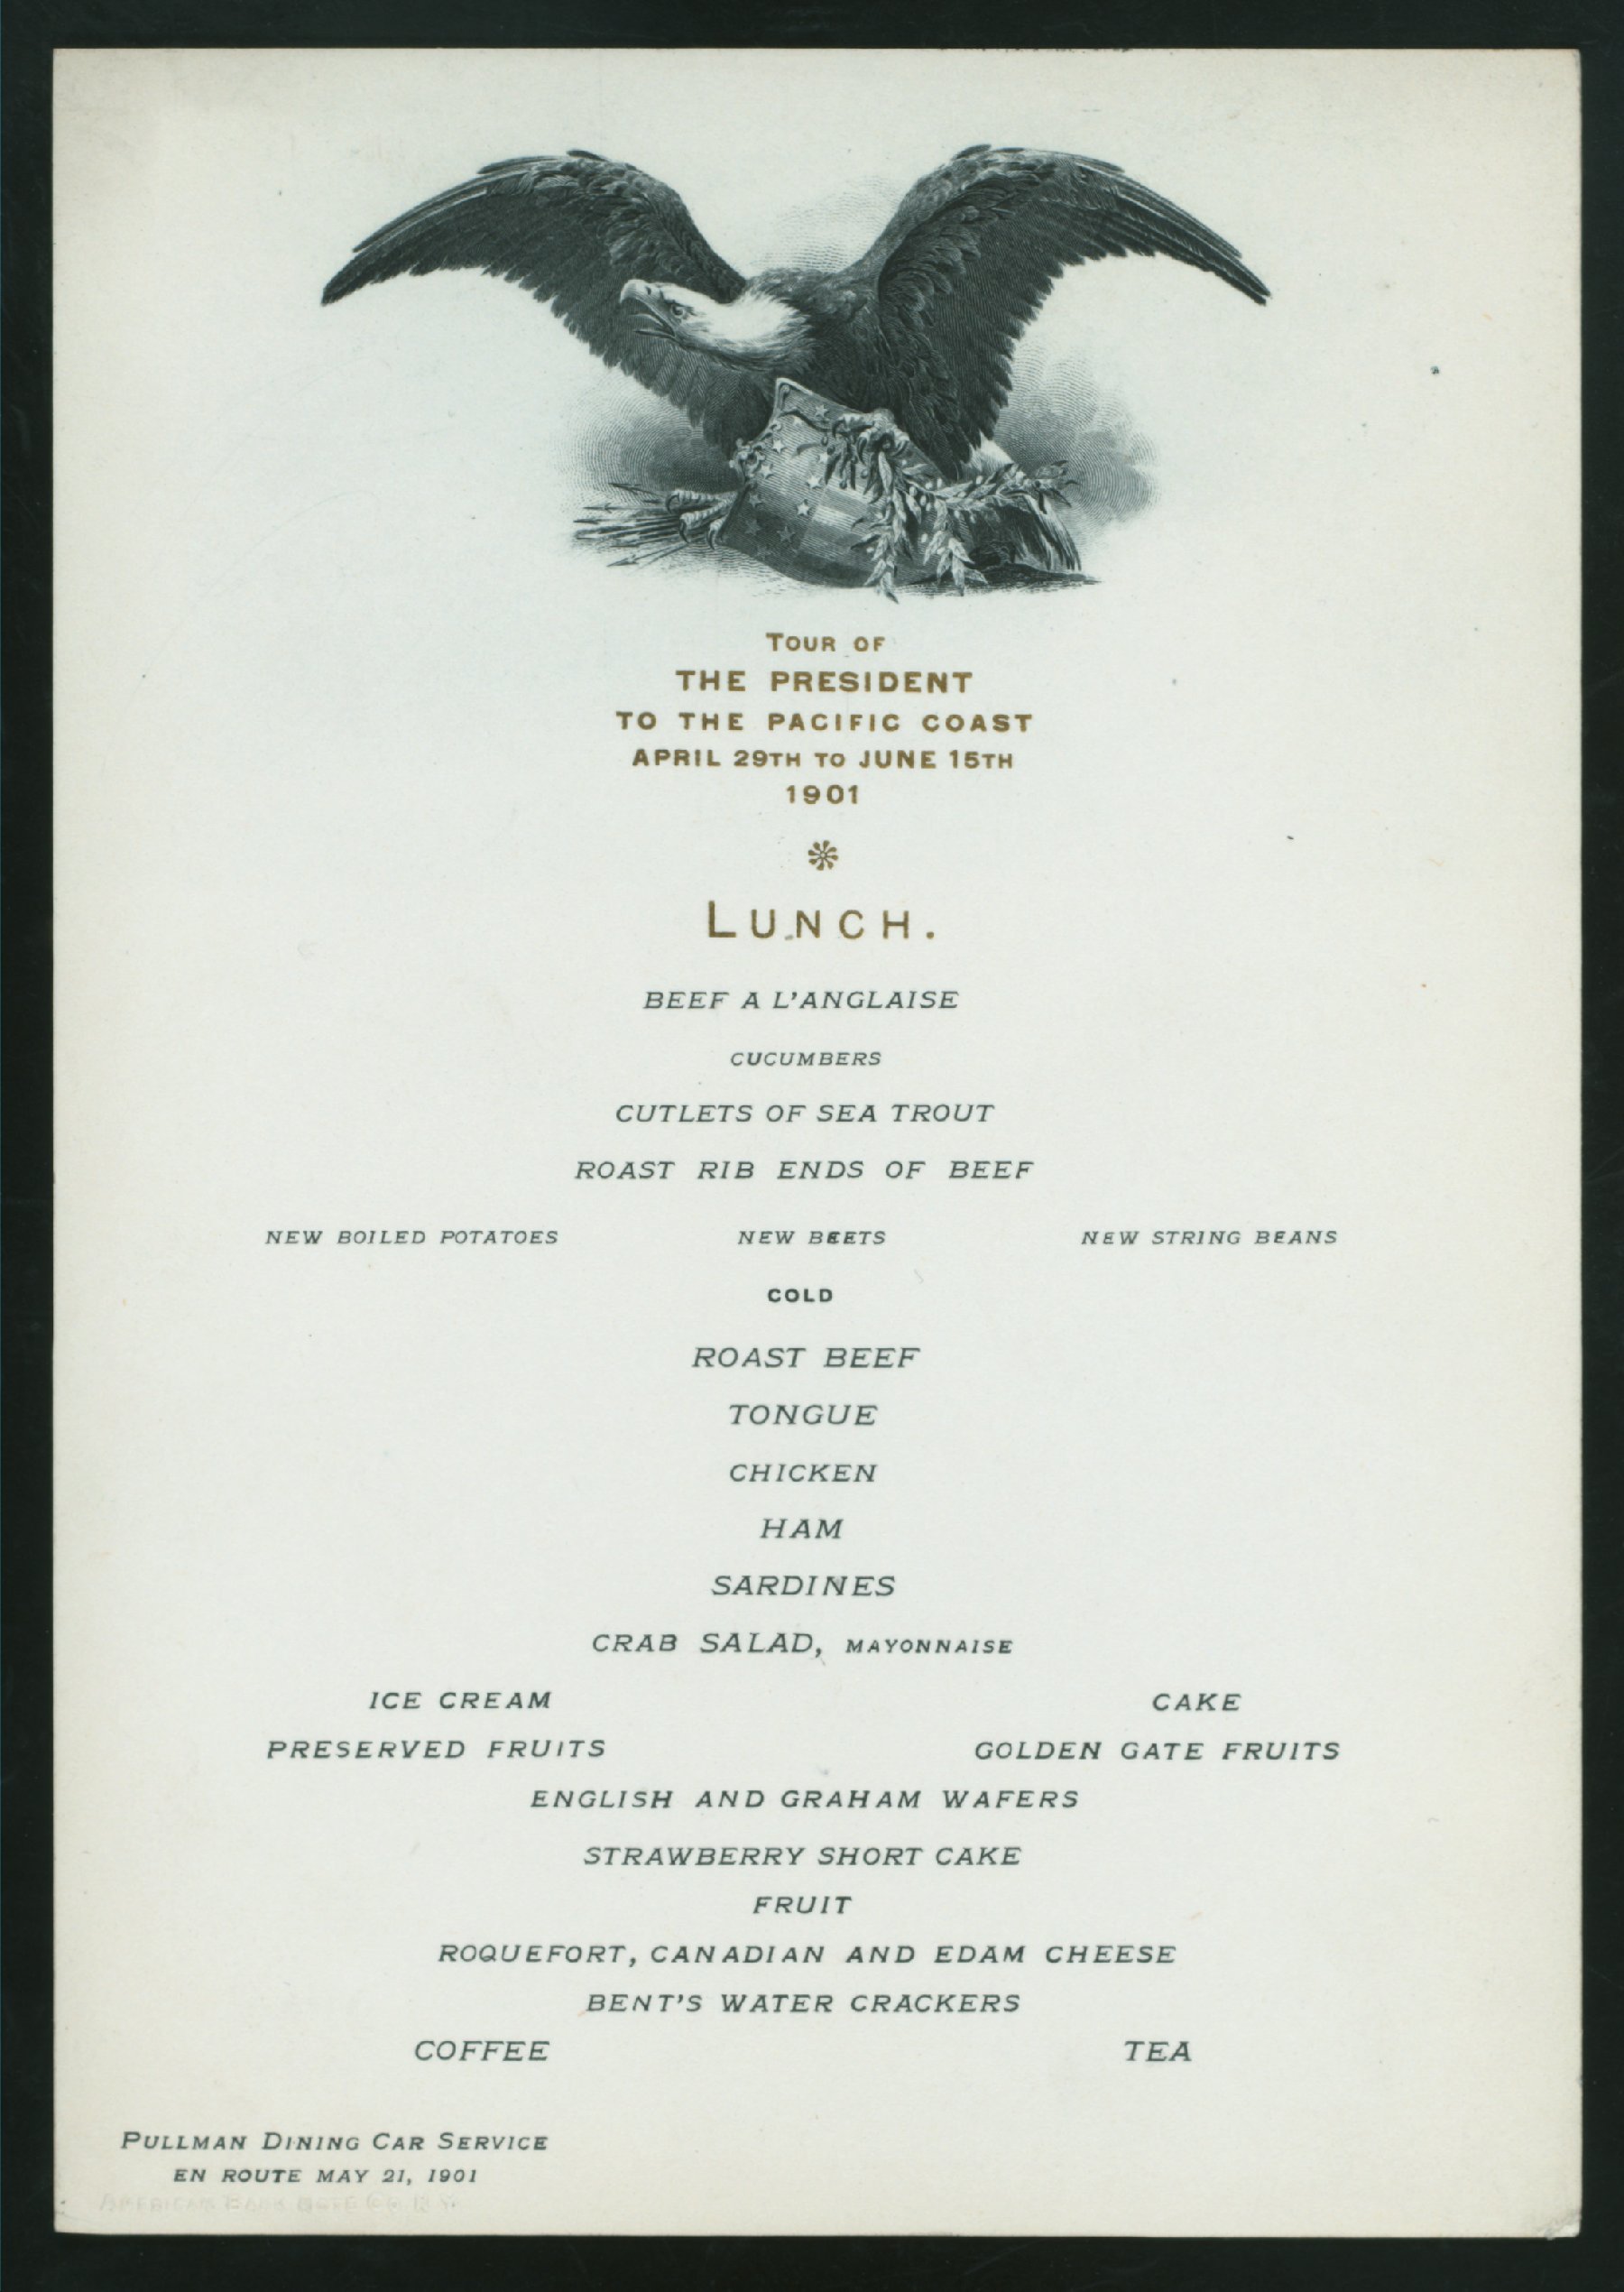 Pullman Dining Car Service Menu for President William McKinley's 1901 visit to the West Coas (click to enlarge)